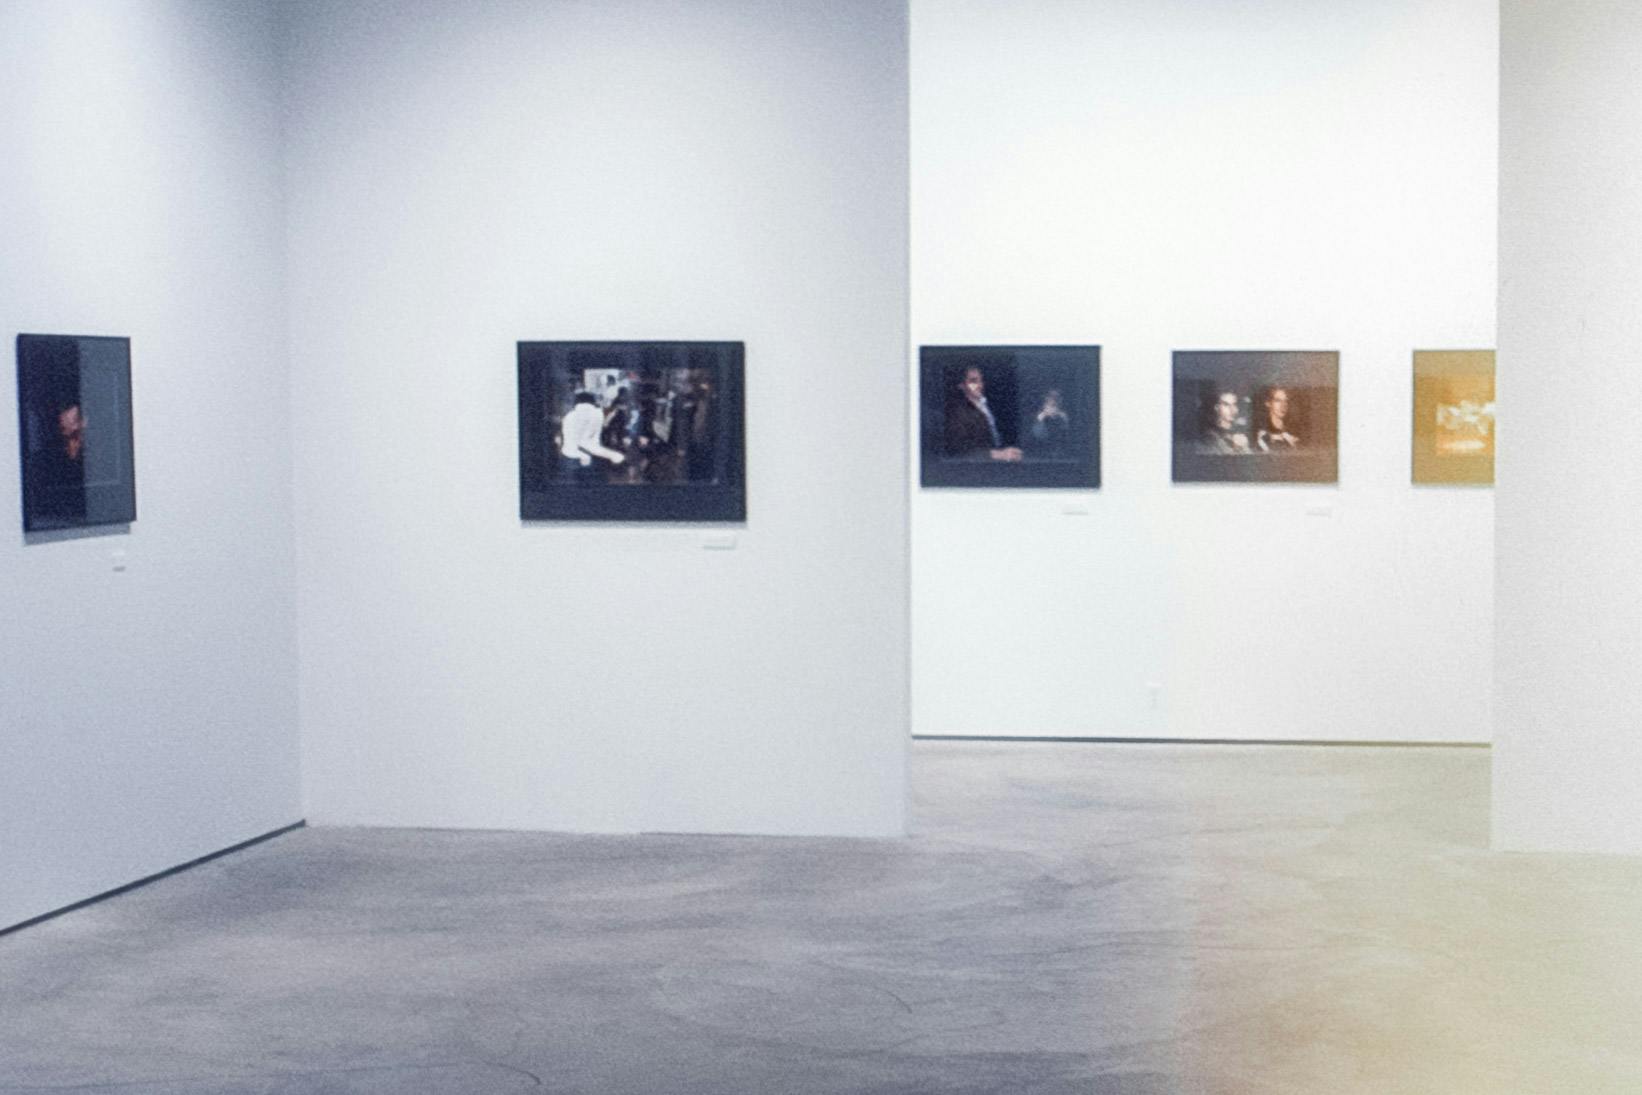 The corner of a gallery space with a hallway visible in the background. On each wall, there are photographic works in black frames. The photos show people dancing or sitting in dark rooms. 